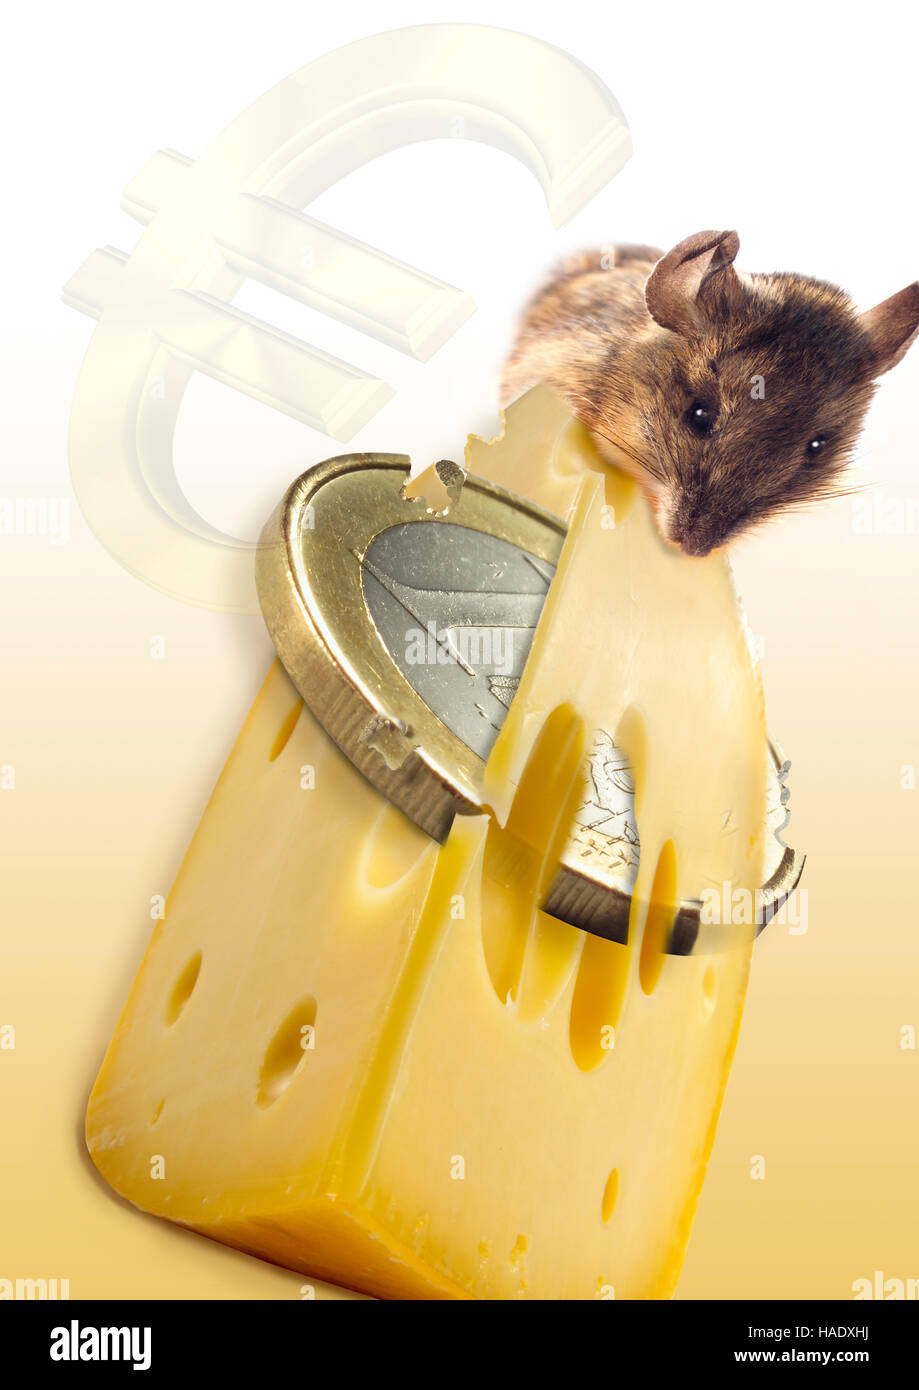 Mouse nibbling on wedge of Euro cheese Stock Photo